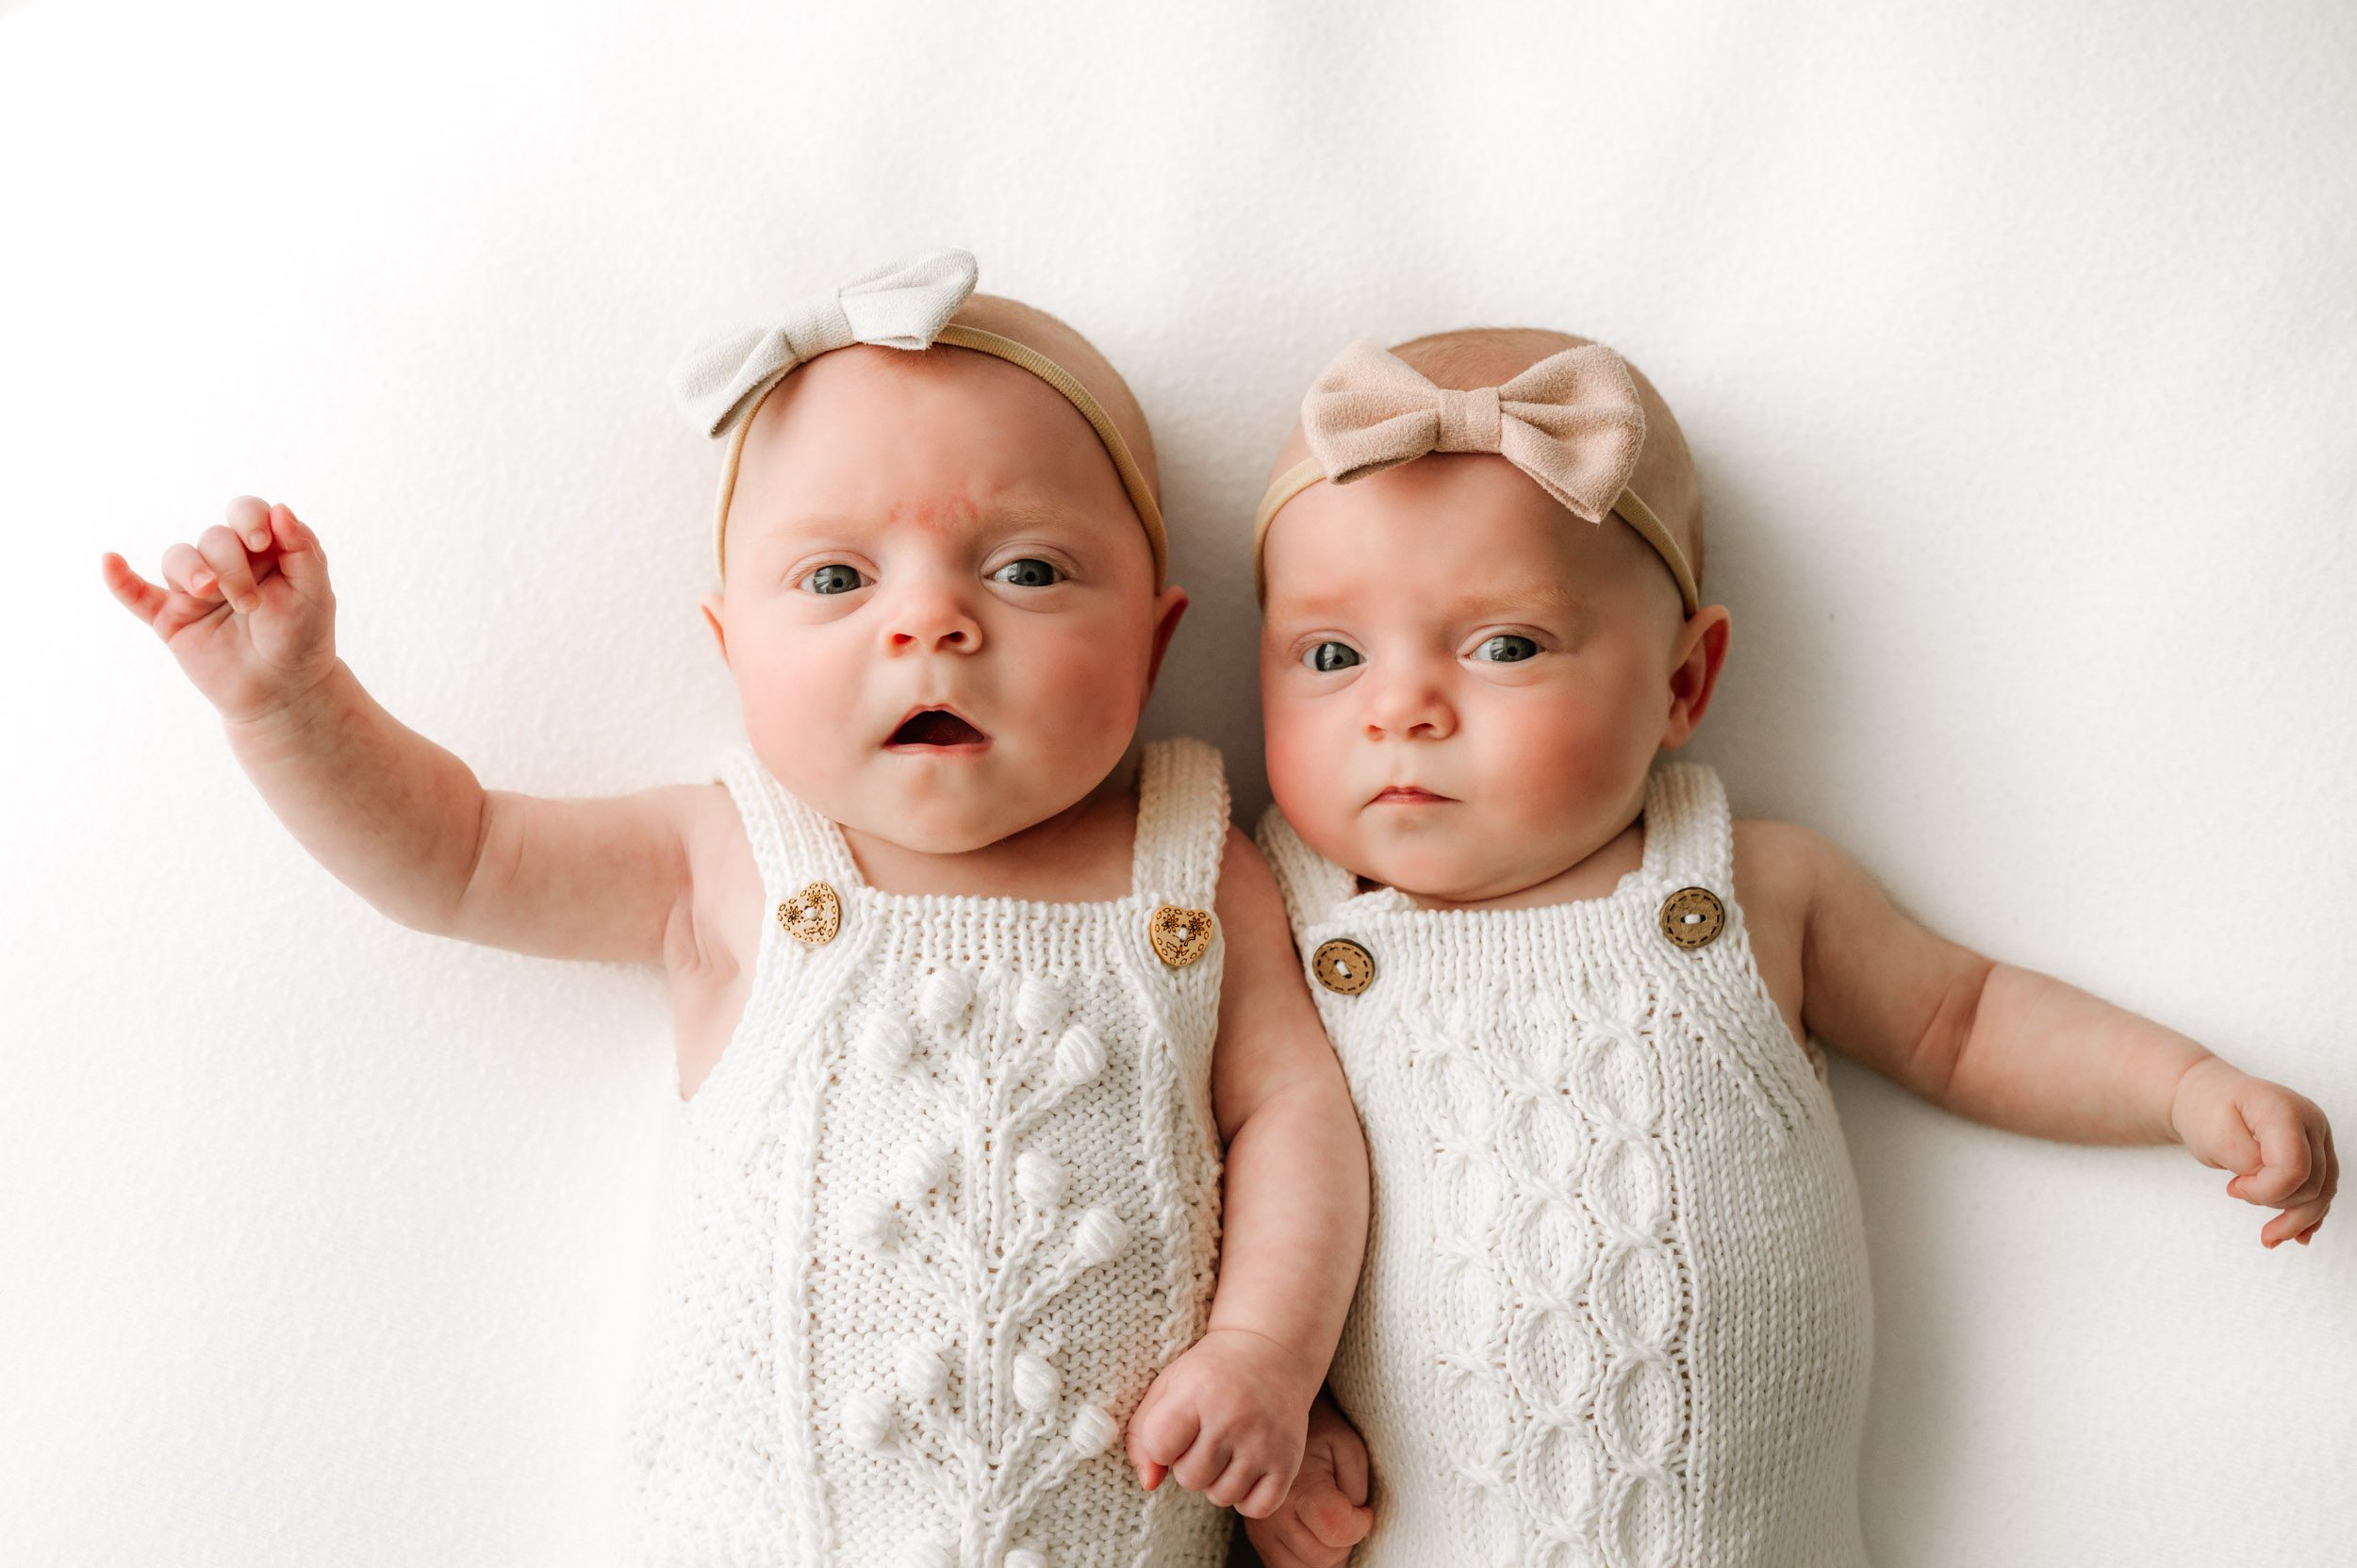 twin baby girls wearing white knit rompers laying on a white backdrop and looking directly at the camera during a newborn photo session